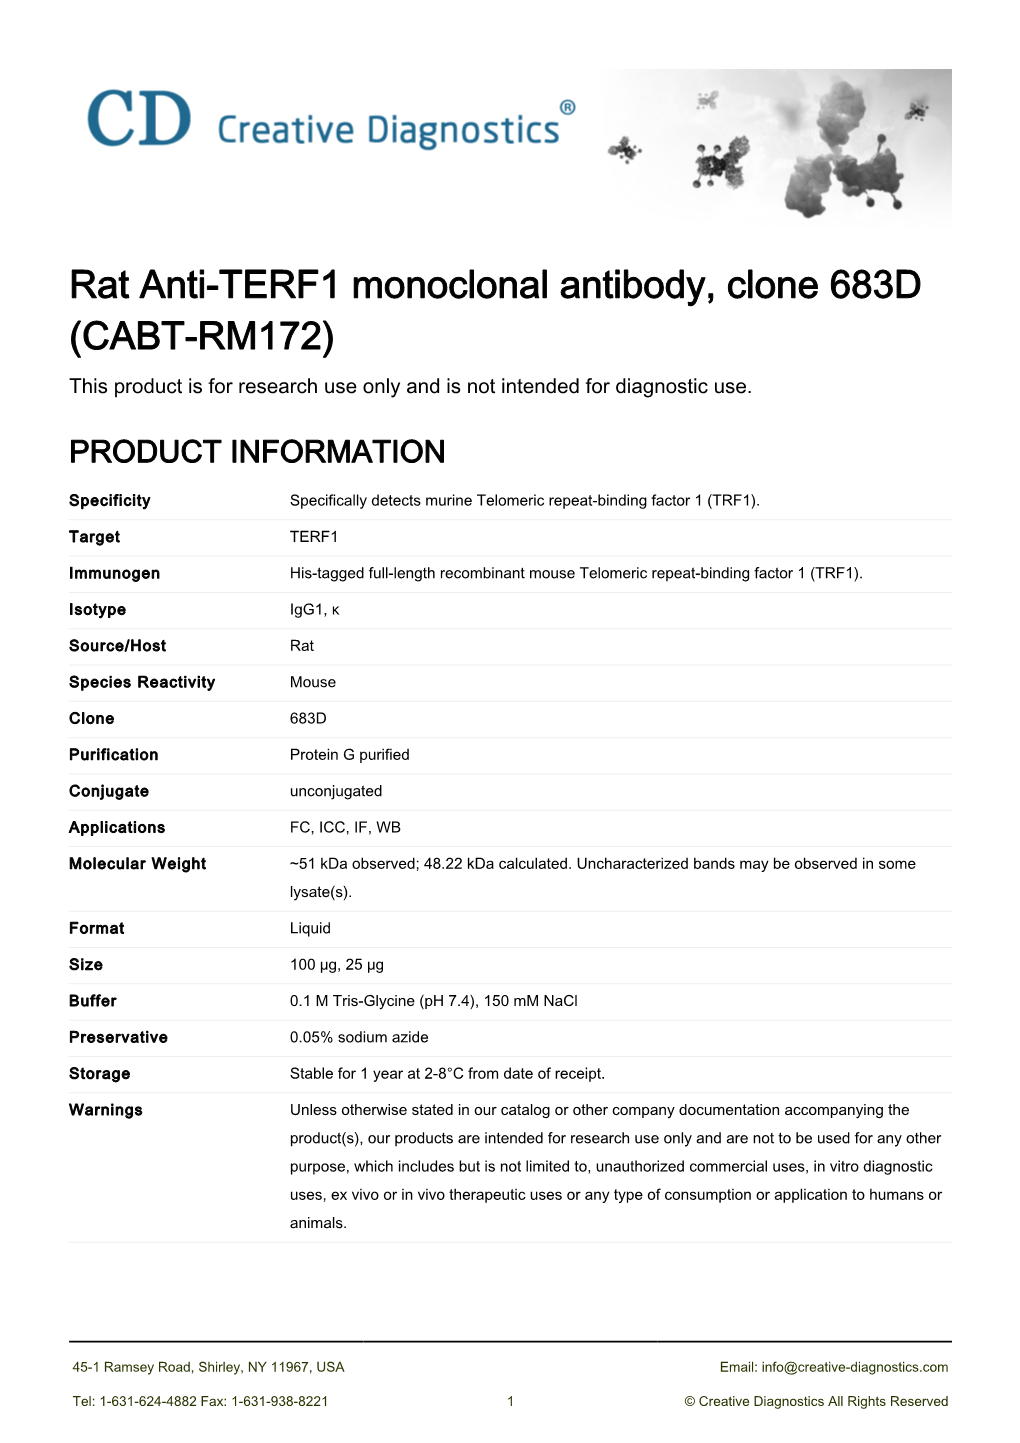 Rat Anti-TERF1 Monoclonal Antibody, Clone 683D (CABT-RM172) This Product Is for Research Use Only and Is Not Intended for Diagnostic Use